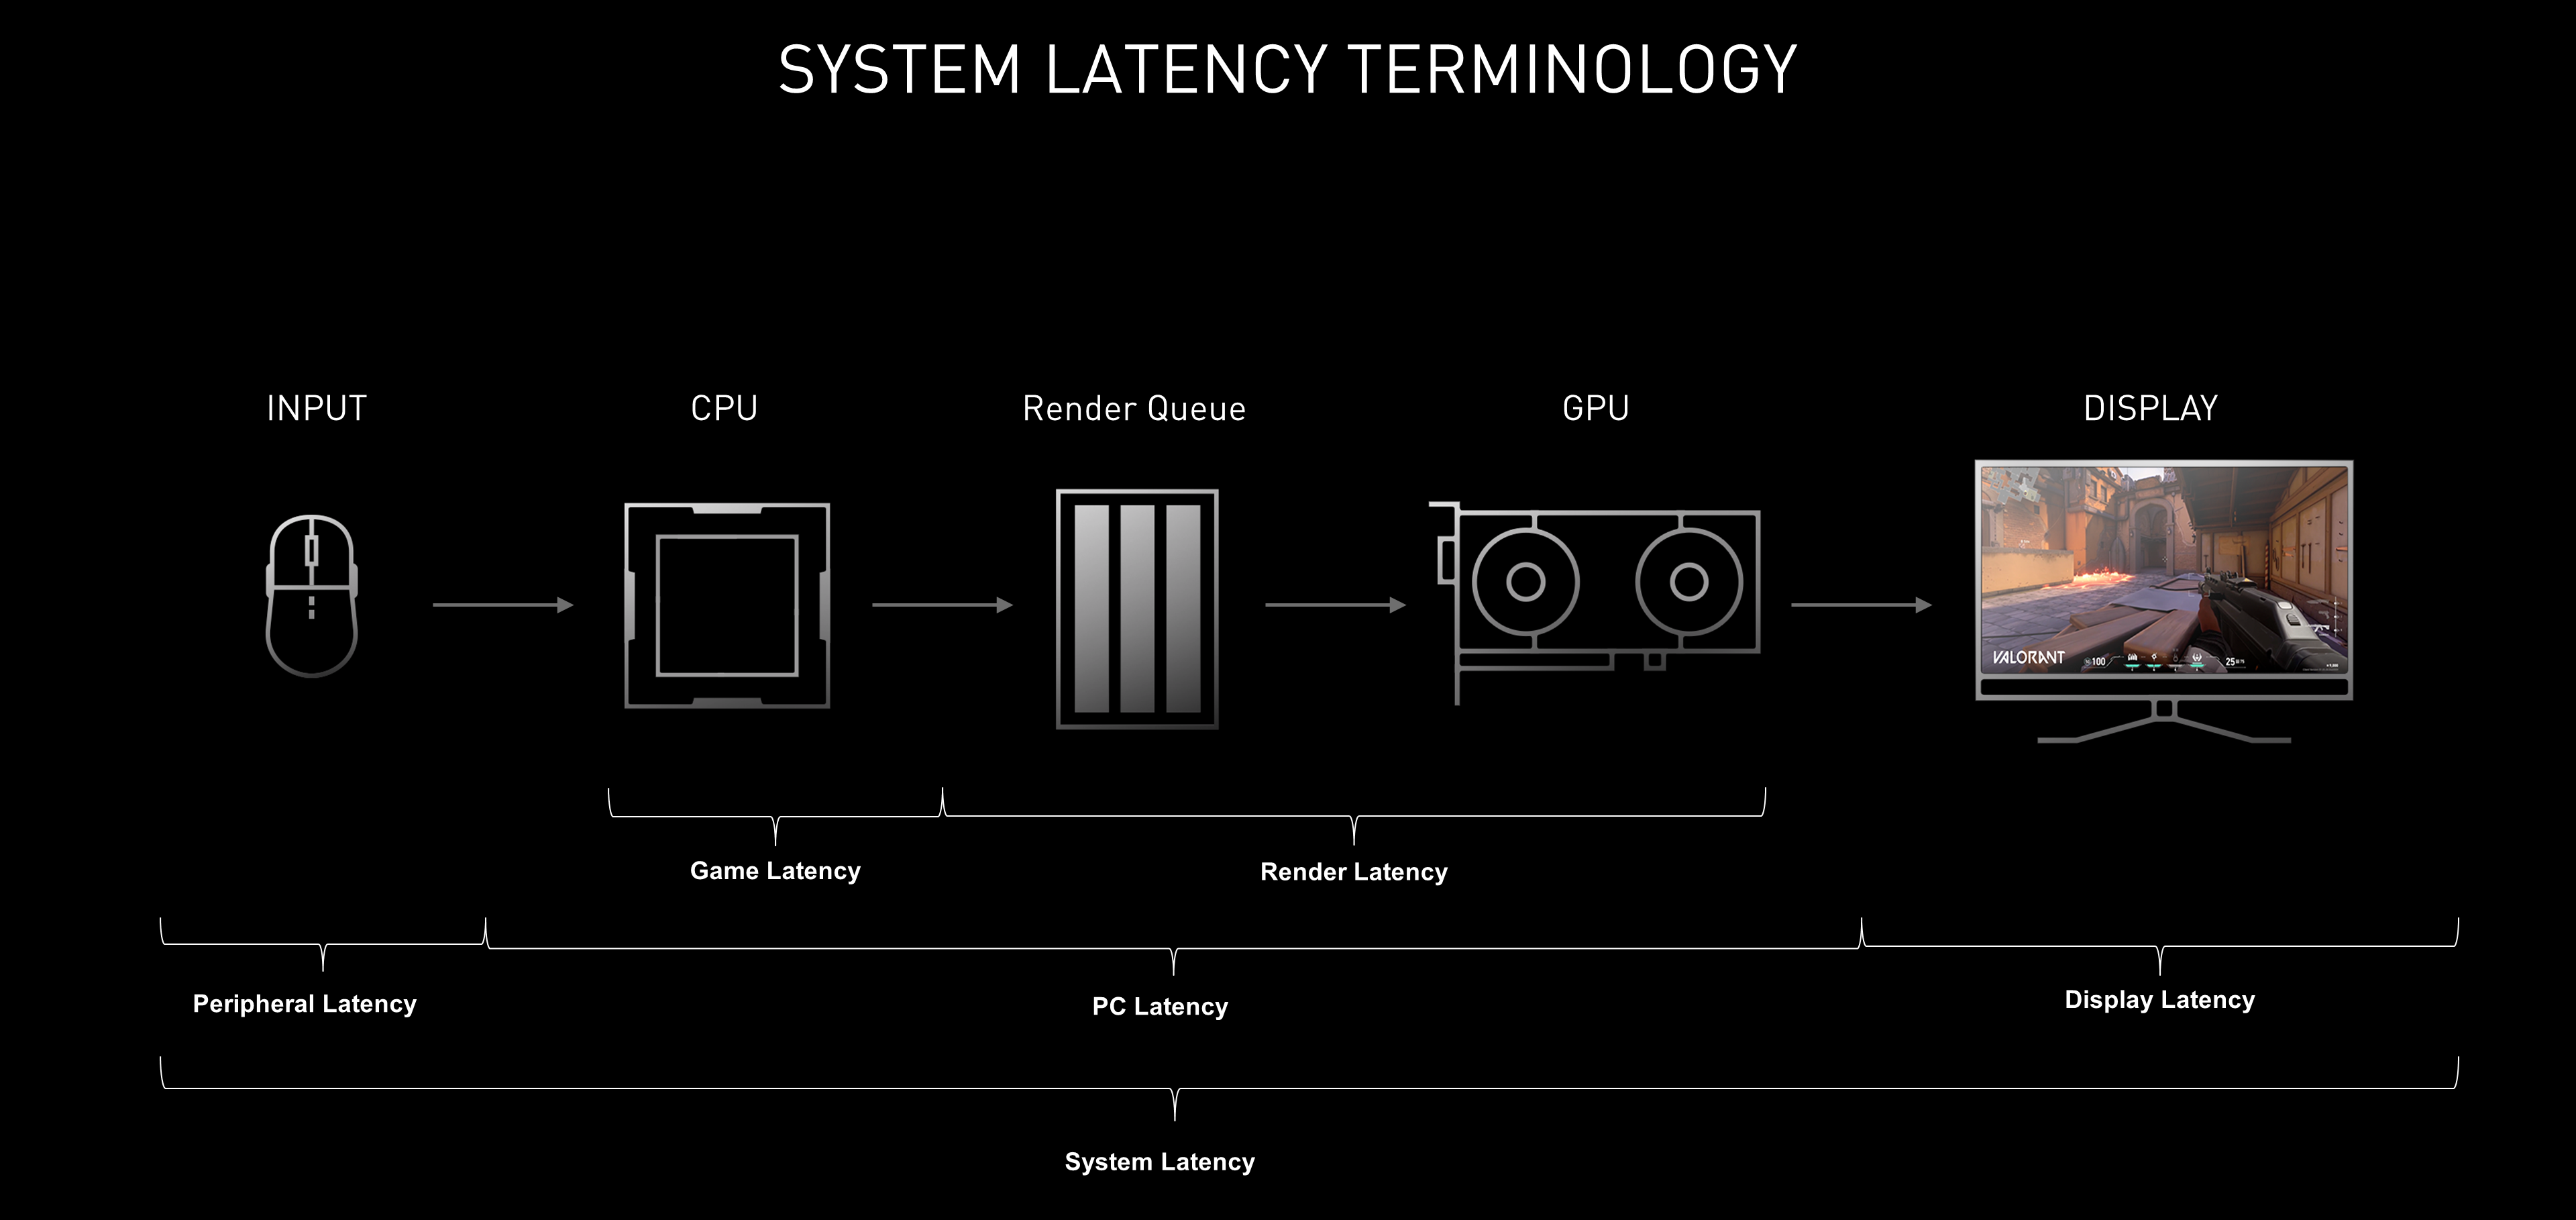 How To Reduce Lag - A Guide To Better System Latency